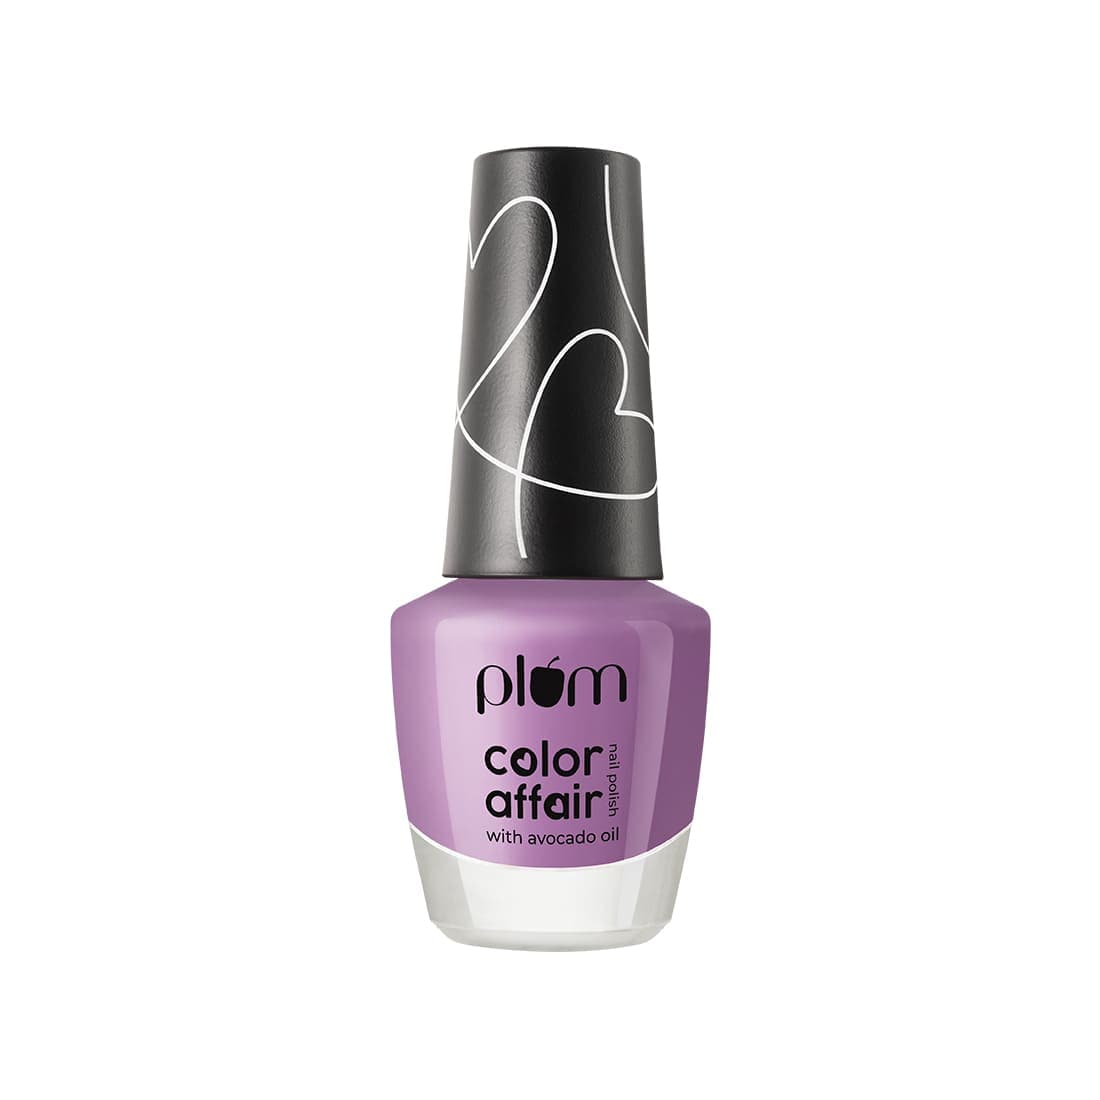 Private Label Nail Polish Manufacturer in Surat,Private Label Nail Polish  Producer India , Third party manufacturer in india